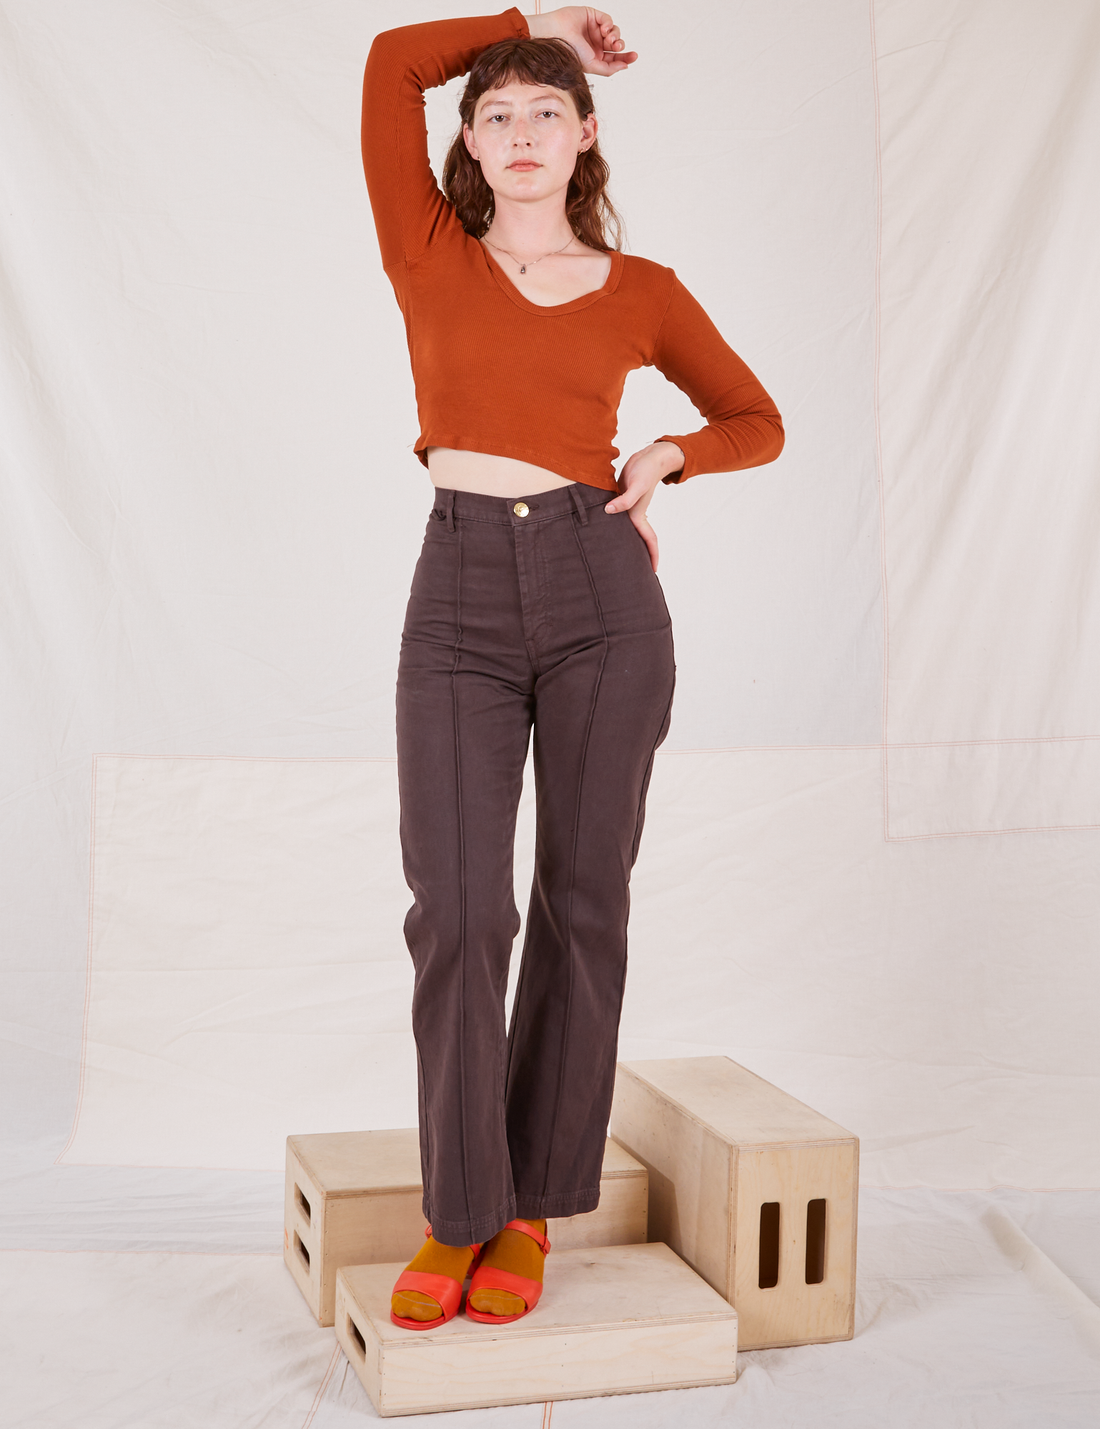 Alex is wearing Long Sleeve V-Neck Tee in Burnt Terracotta and espresso brown Western Pants